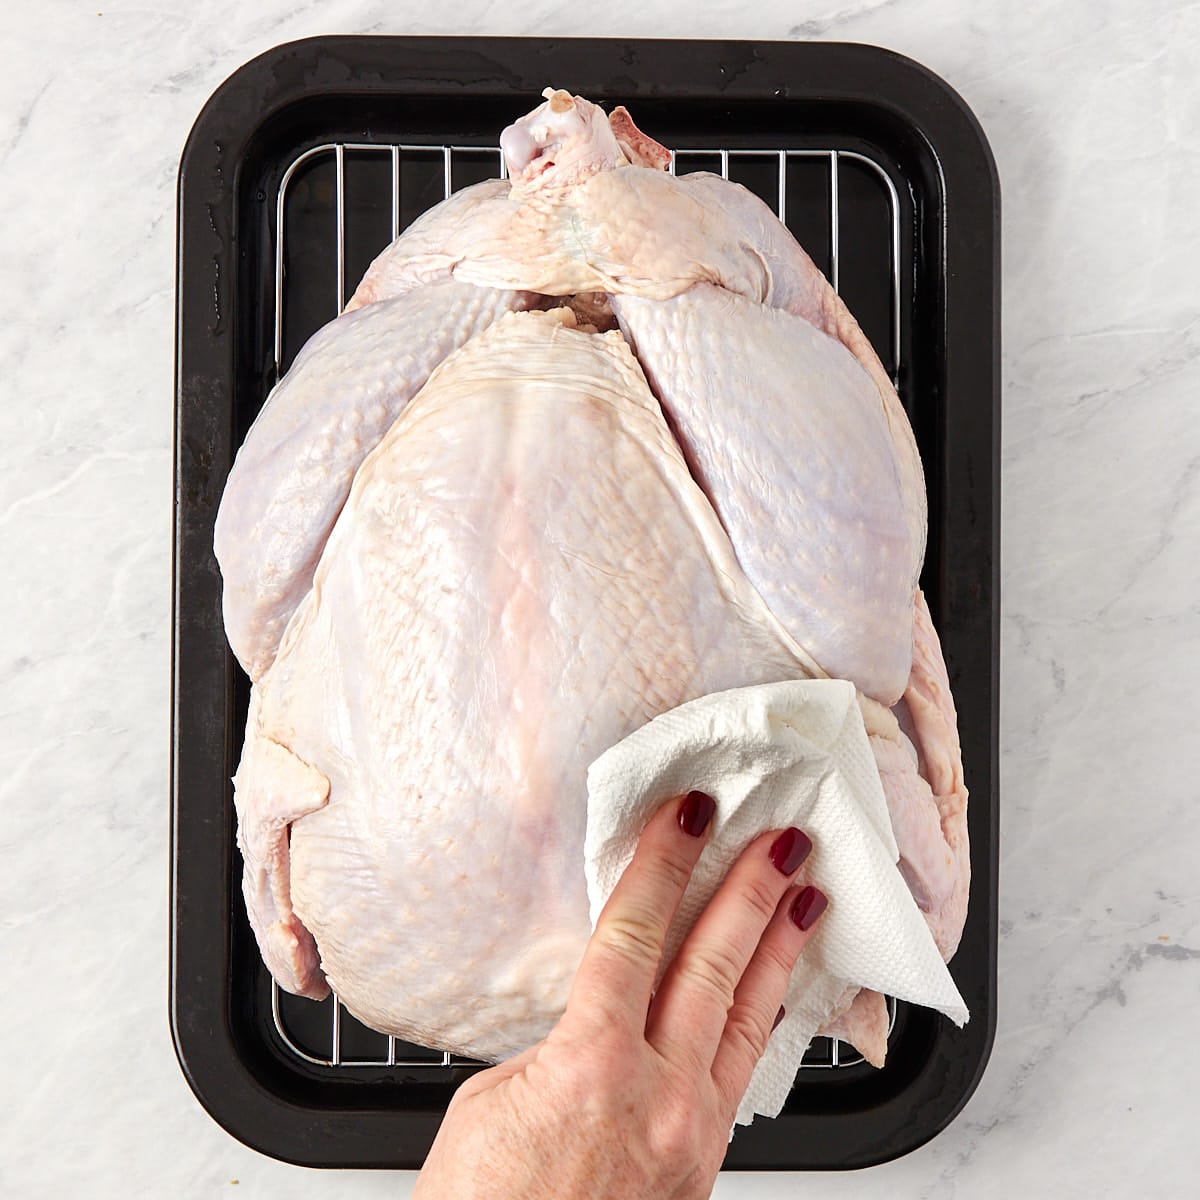 thawed turkey on a wire rack in a pan being patted dry with a paper towel.